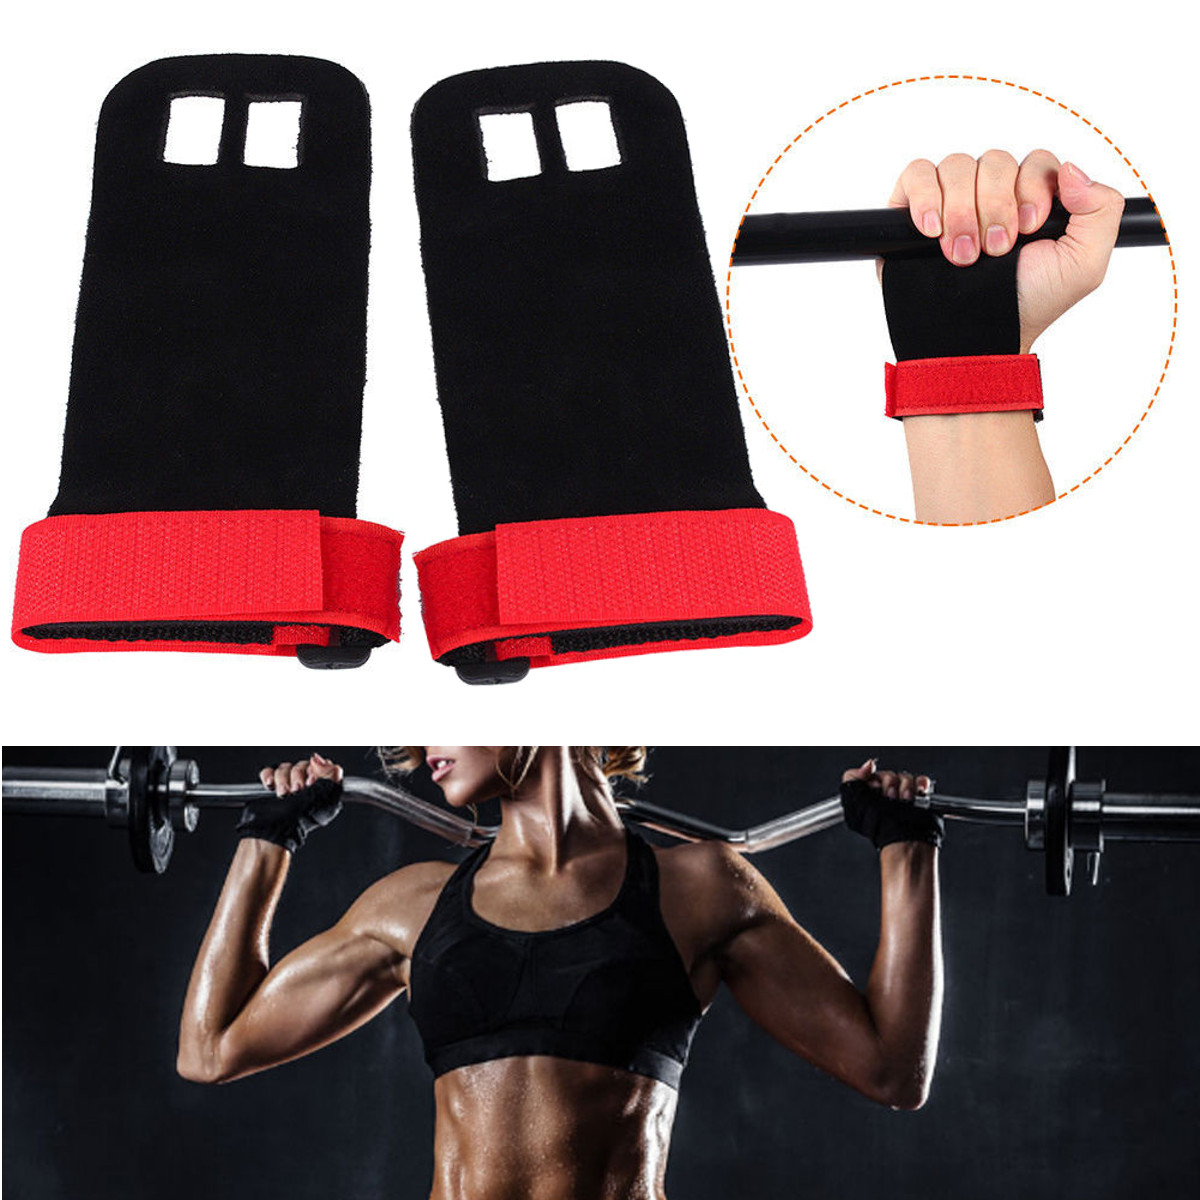 1Pair-Crossfit-Grips-for-Weight-lifting-Hand-Support-Gymnastics-Leather-Palm-Protectors-Hand-Guards-1226402-1